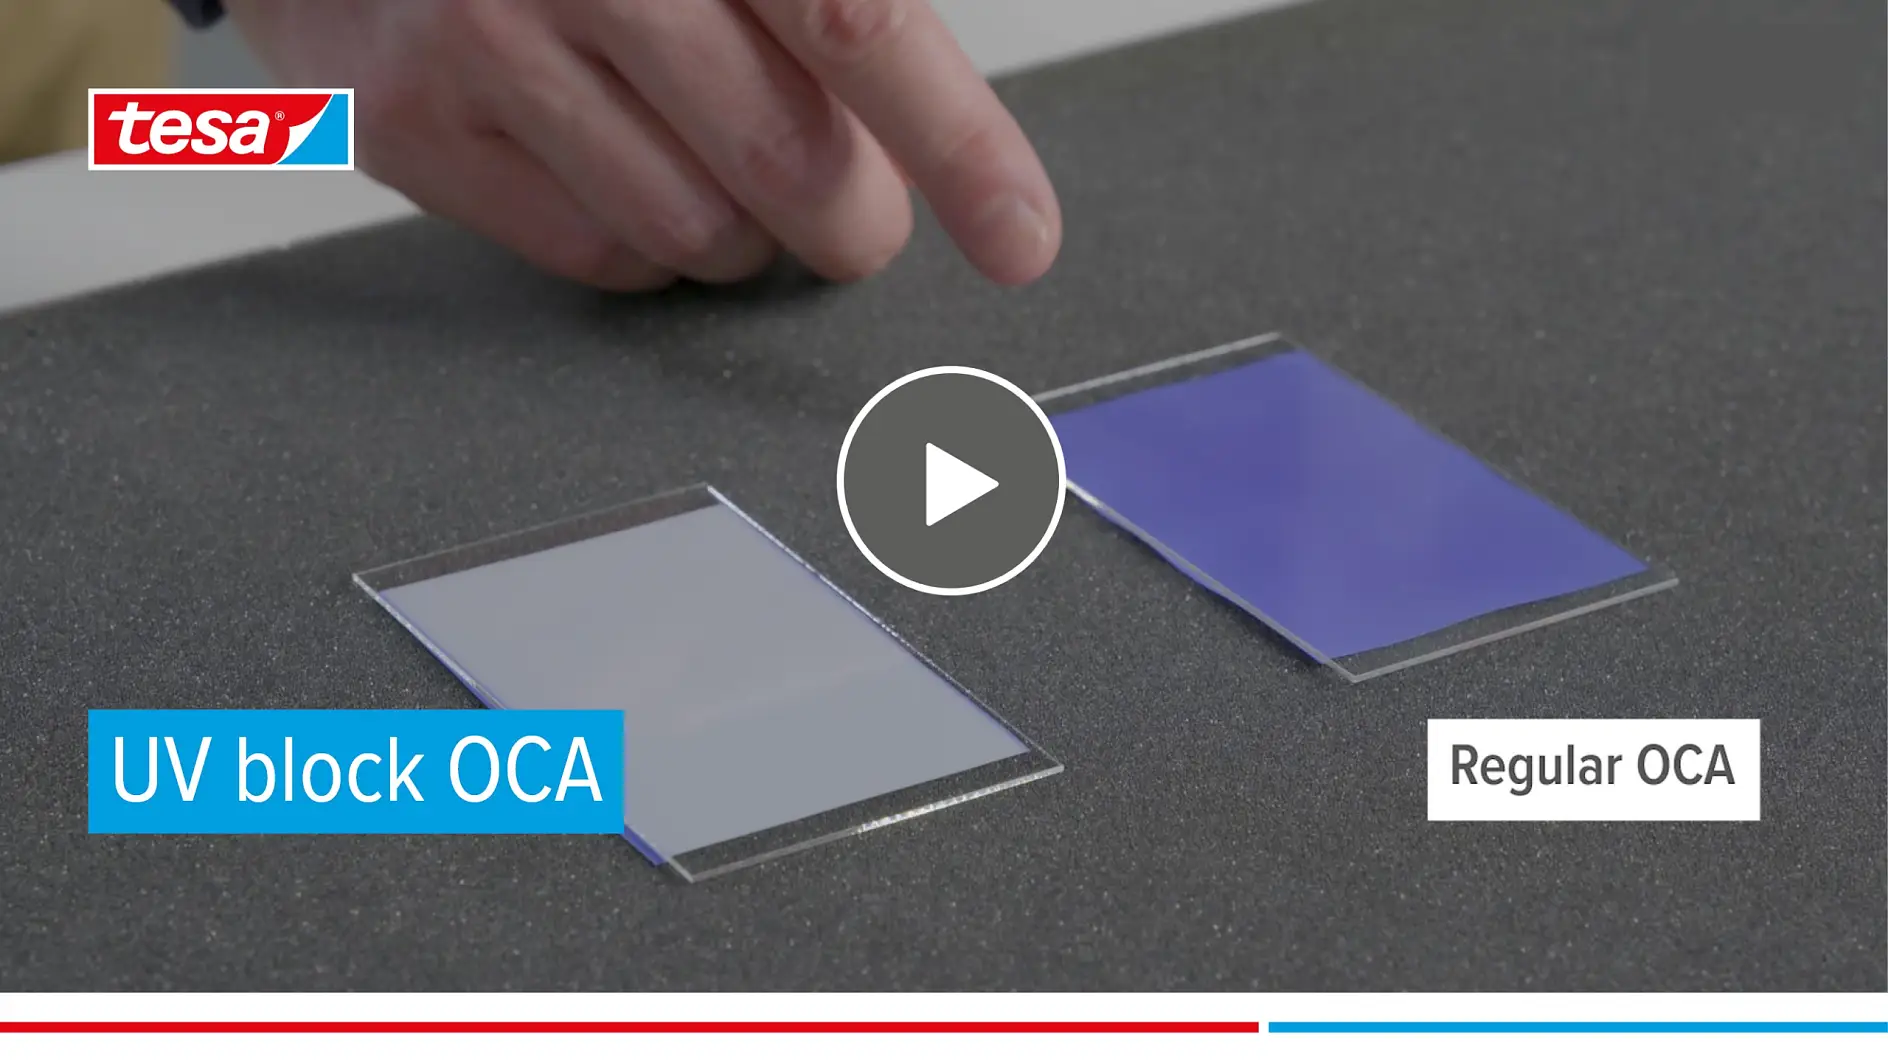 UV block OCA to prevent discoloration and yellowing | tesa